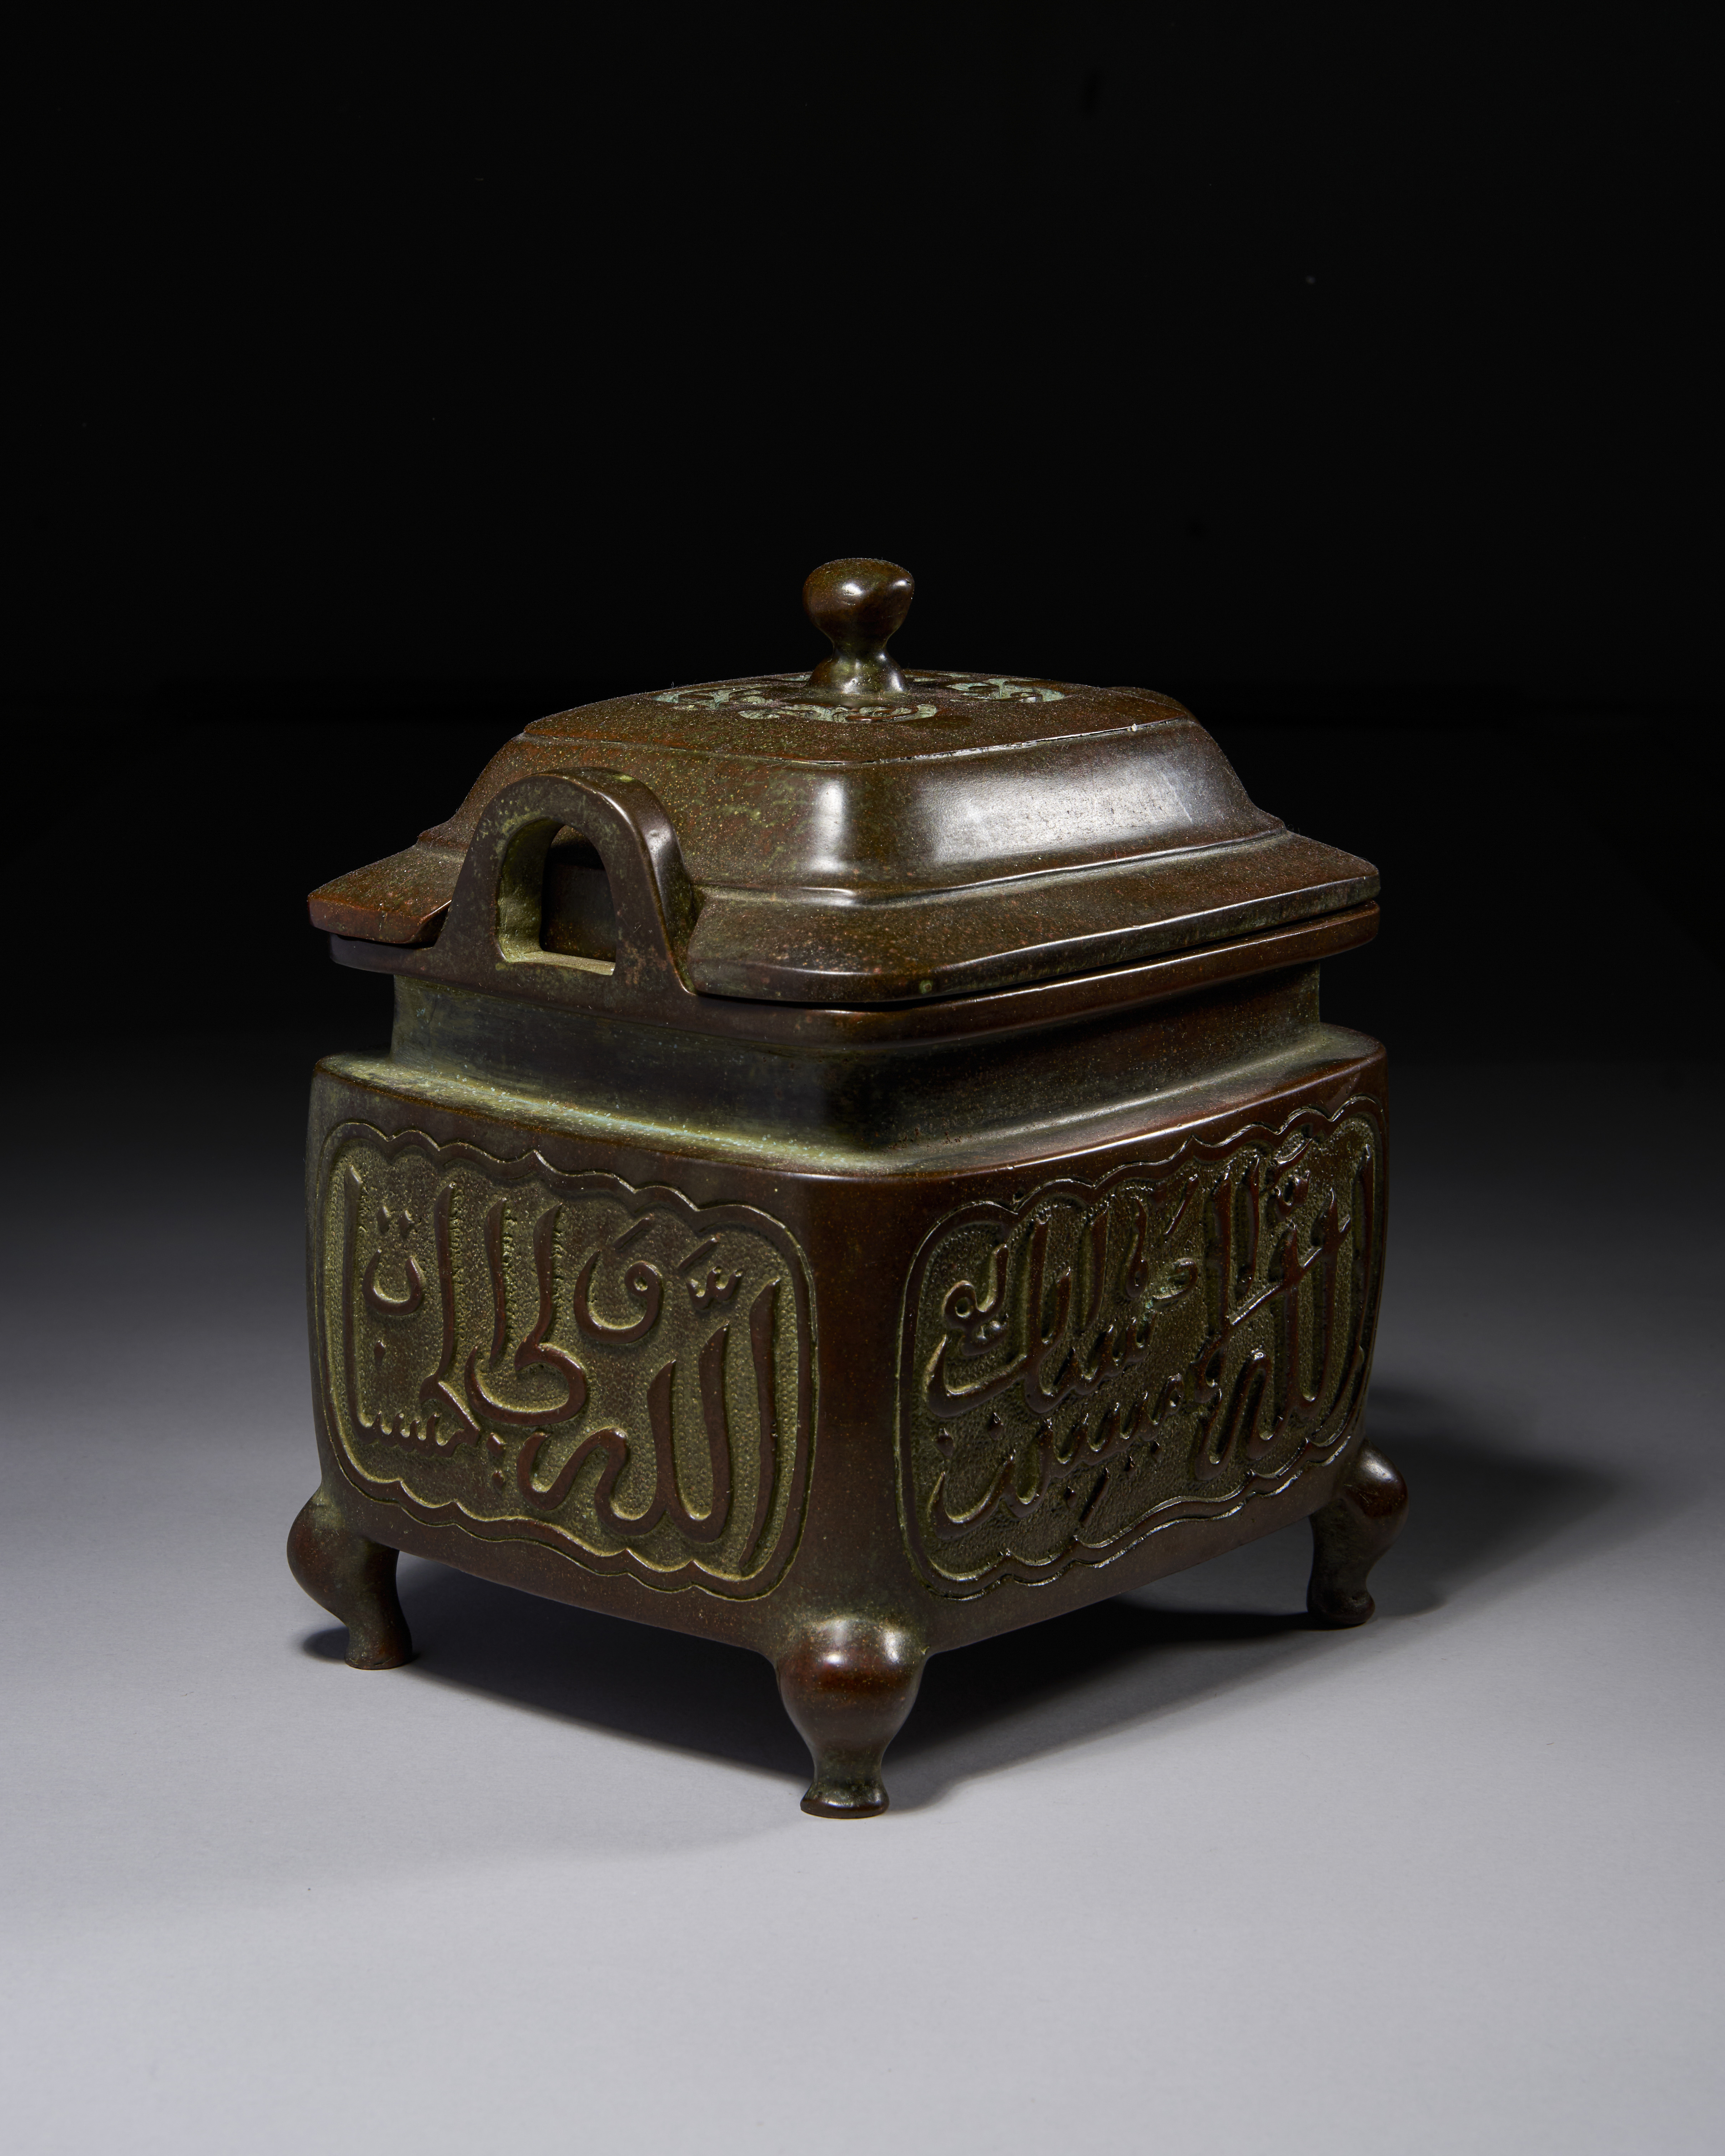 A LARGE & HEAVY CHINESE BRONZE INCENSER BURNER WITH ISLAMIC INSCRIPTION, QING DYNASTY (1644-1911) - Image 2 of 5